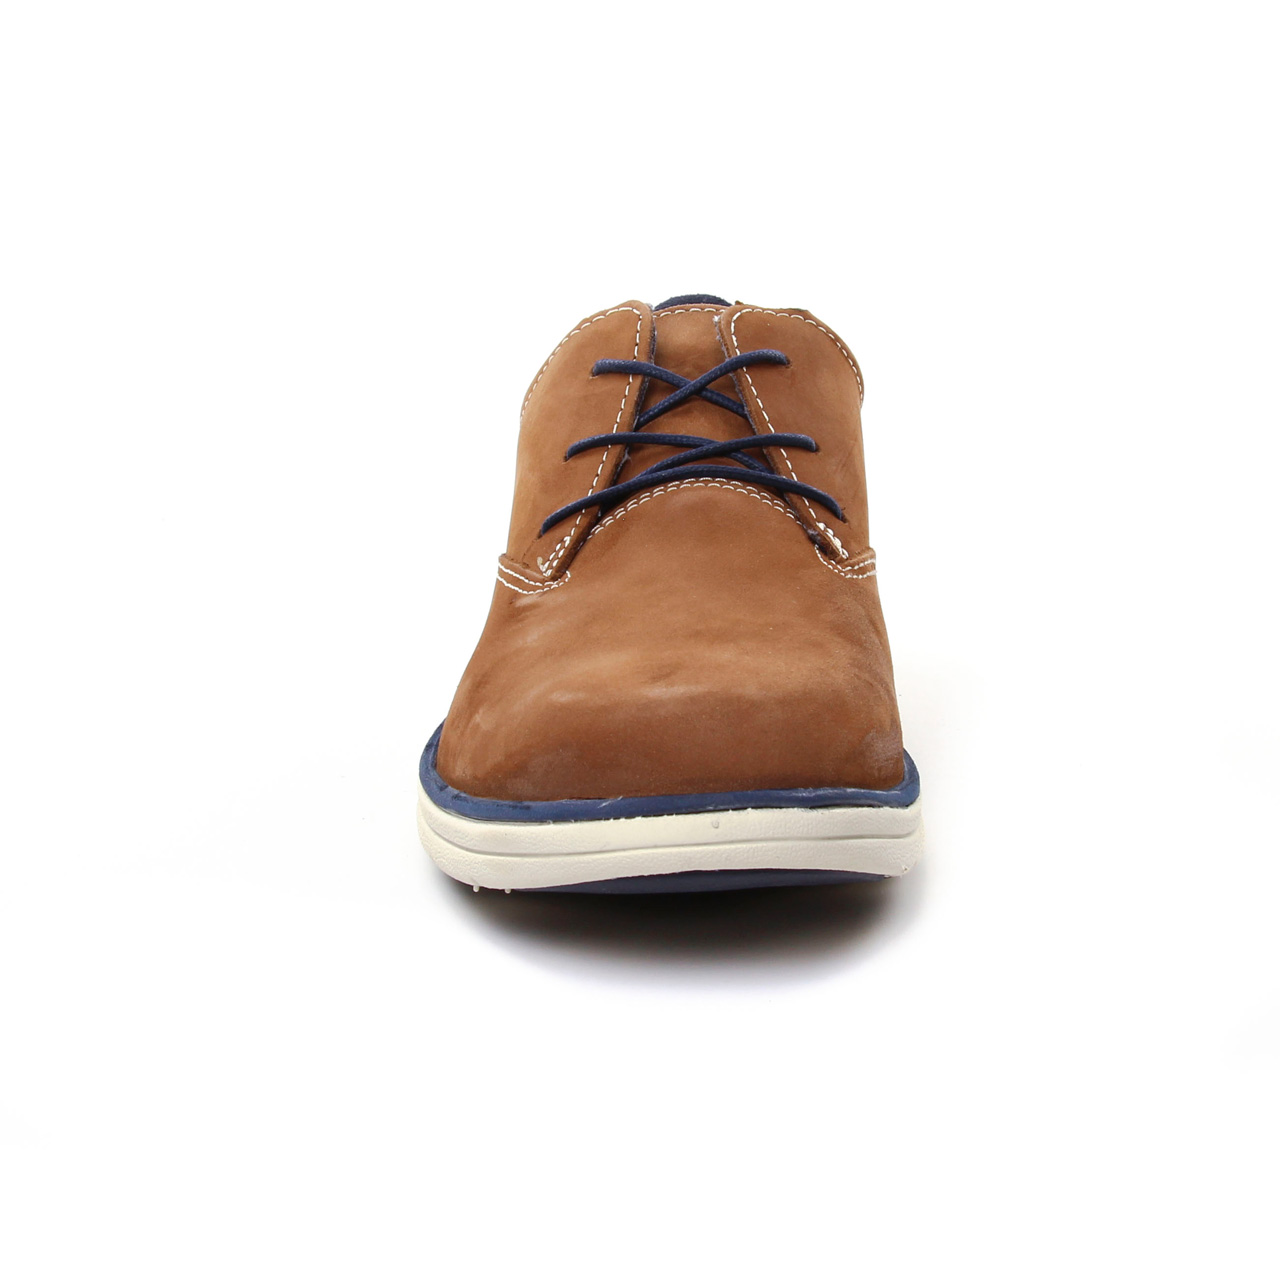 Chaussures à lacets TIMBERLAND 42 marron Homme Chaussures Timberland Homme Chaussures à lacets Timberland Homme Chaussures à lacets Timberland Homme 